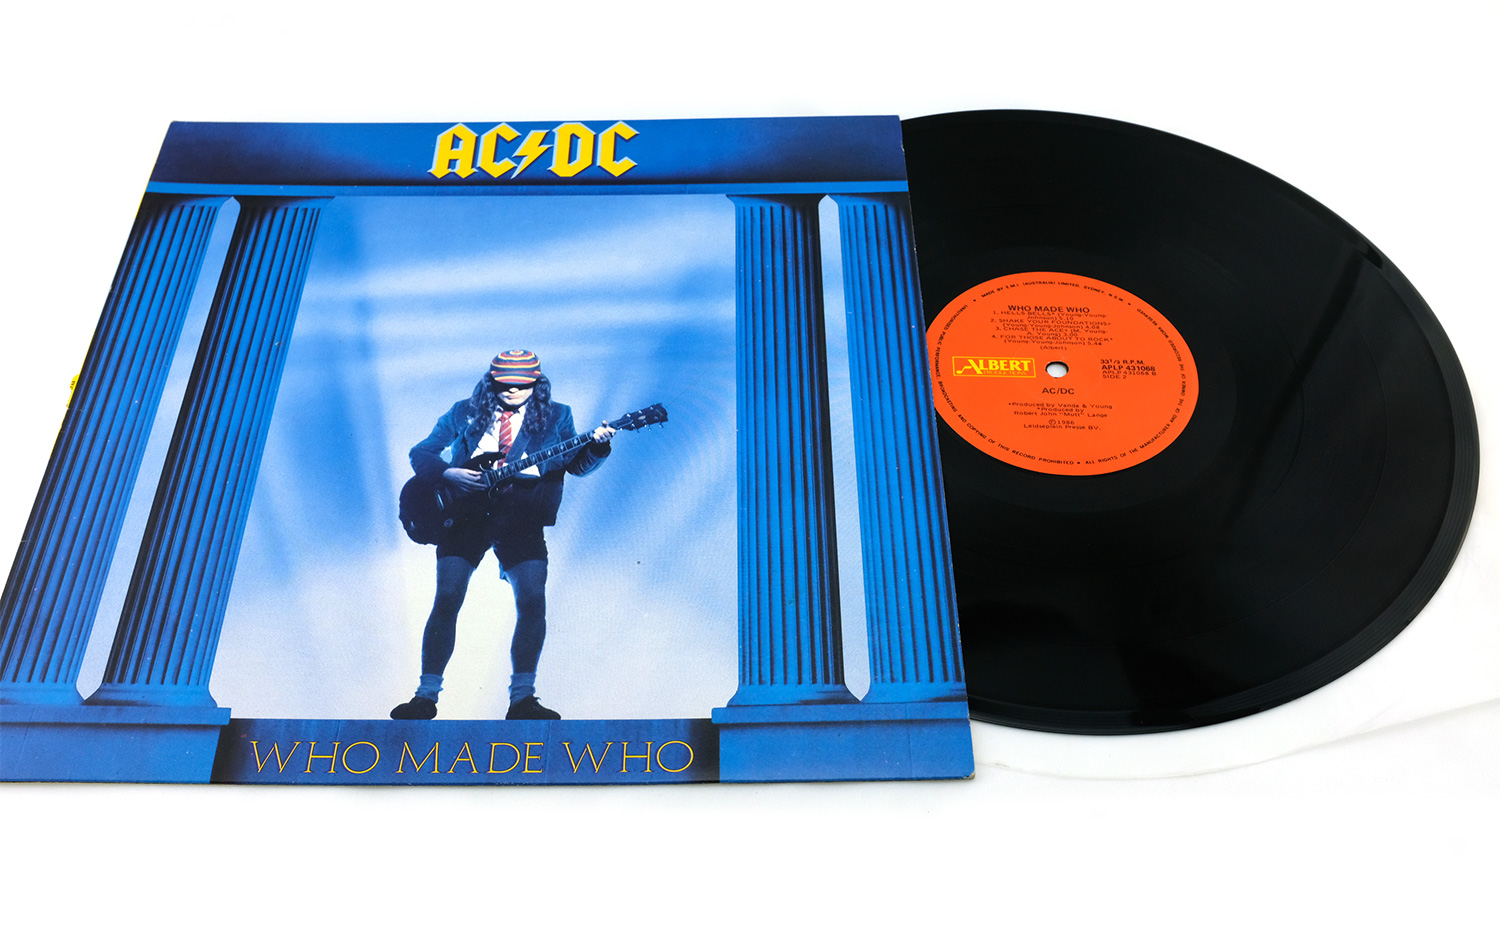 Ripley - ACDC - WHO MADE WHO VINILO